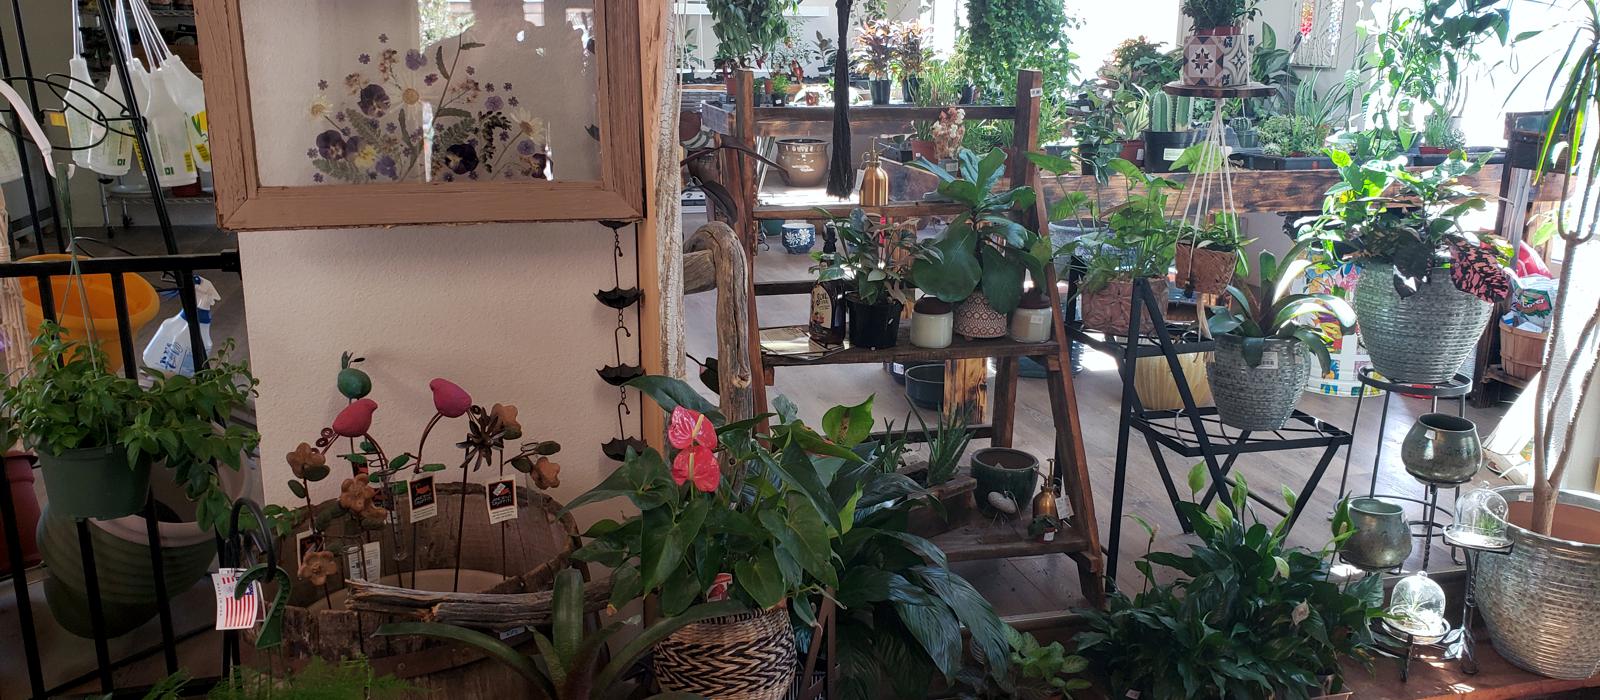 Locally Family Owned and Operated Indoor Garden Center Open Year Round located in Walsenburg